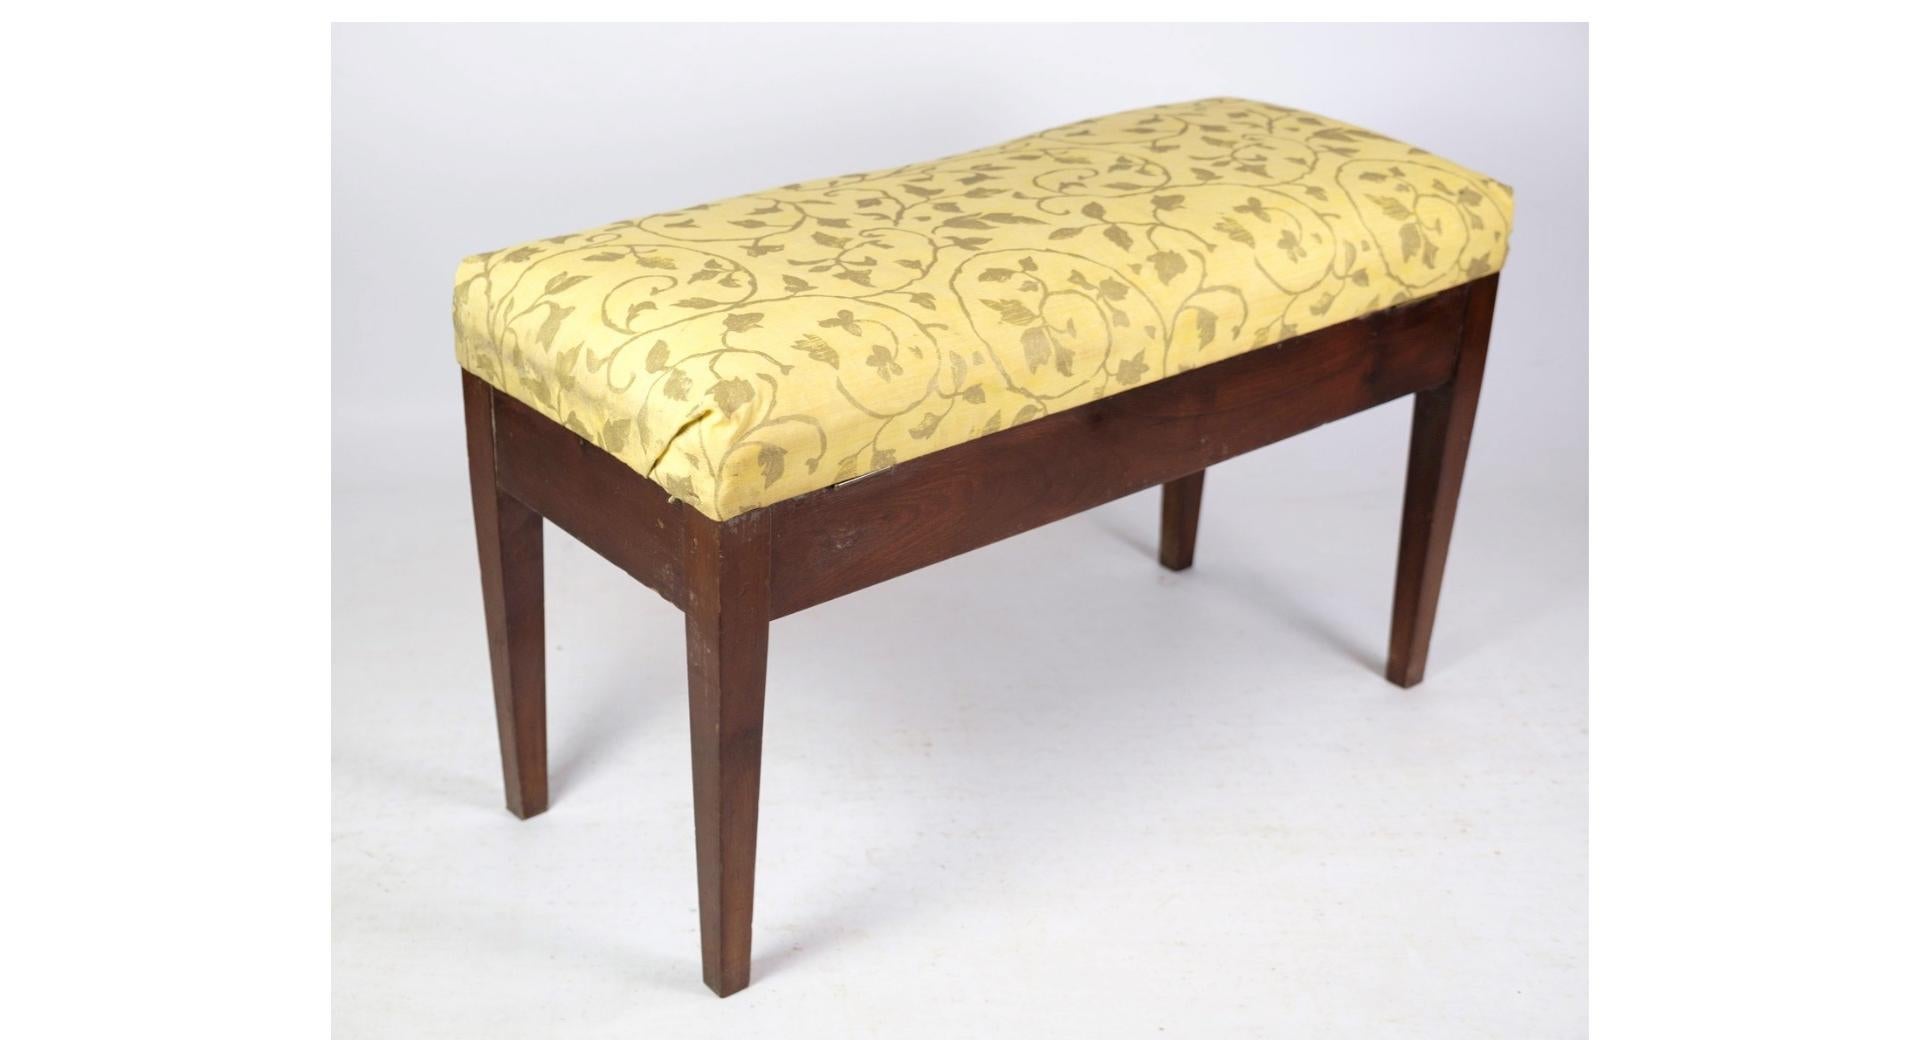 Scandinavian Modern Piano Bench / Stool Made In Mahogany With Light Floral Fabric From 1910s For Sale